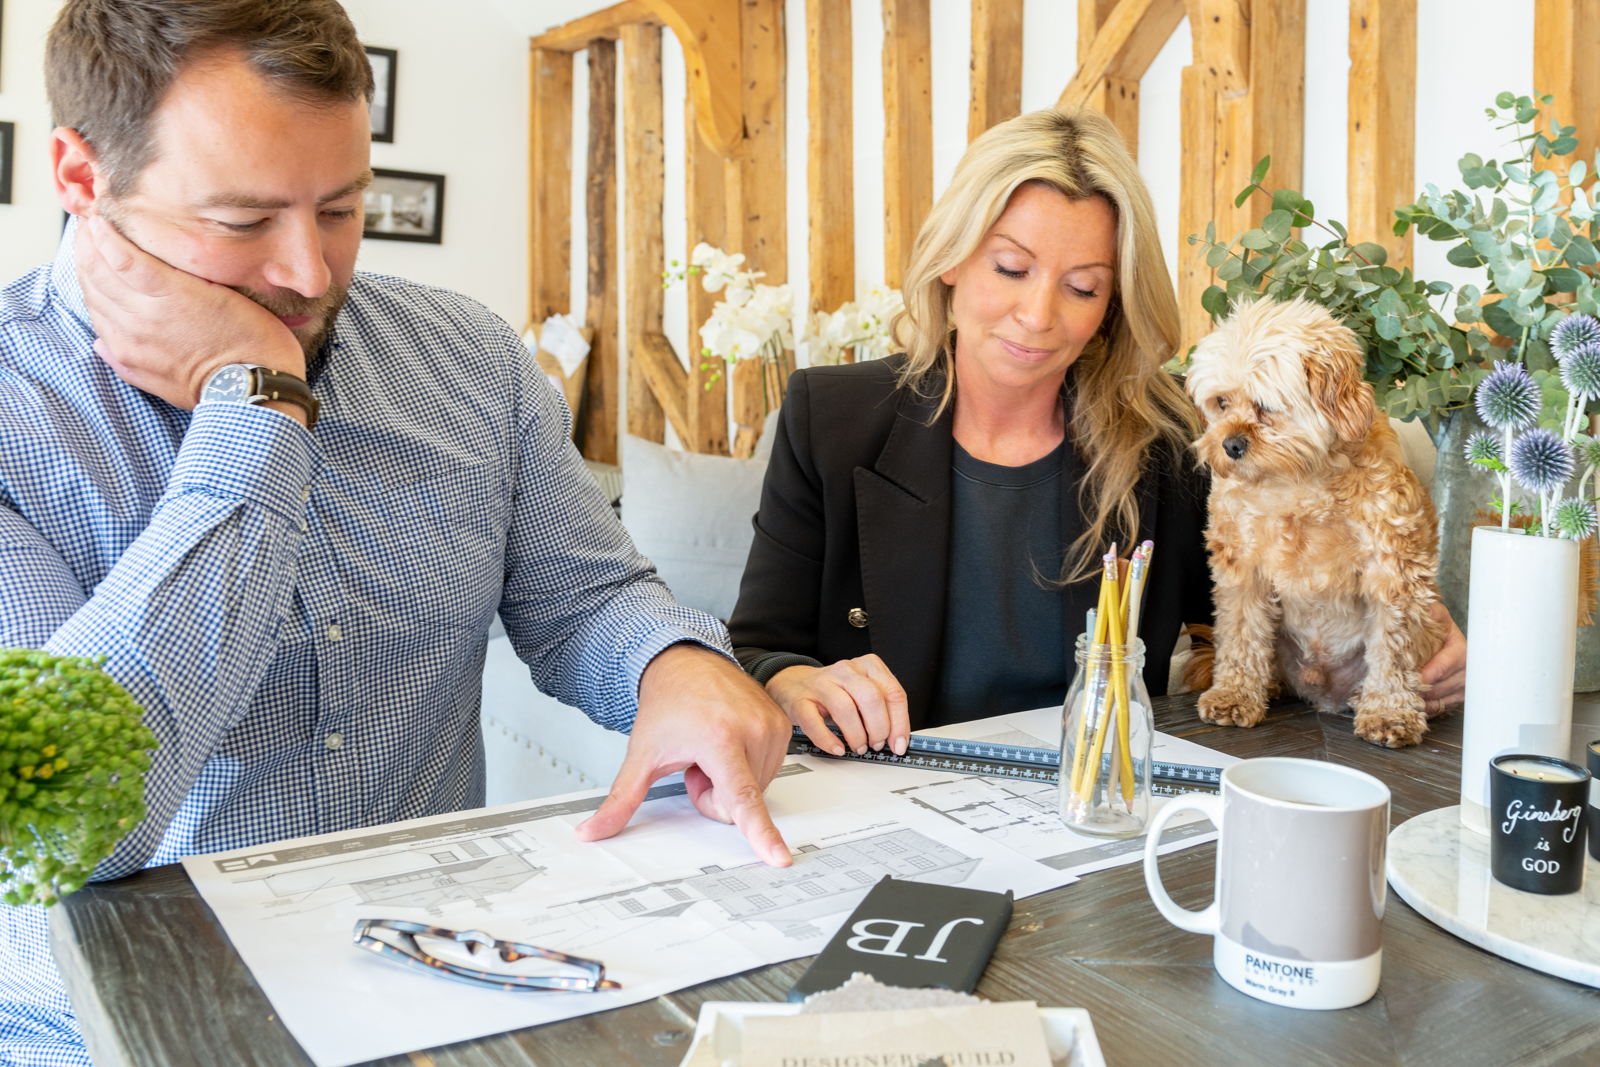 a man and a woman look at interior samples during a personal branding photography shoot in guildford